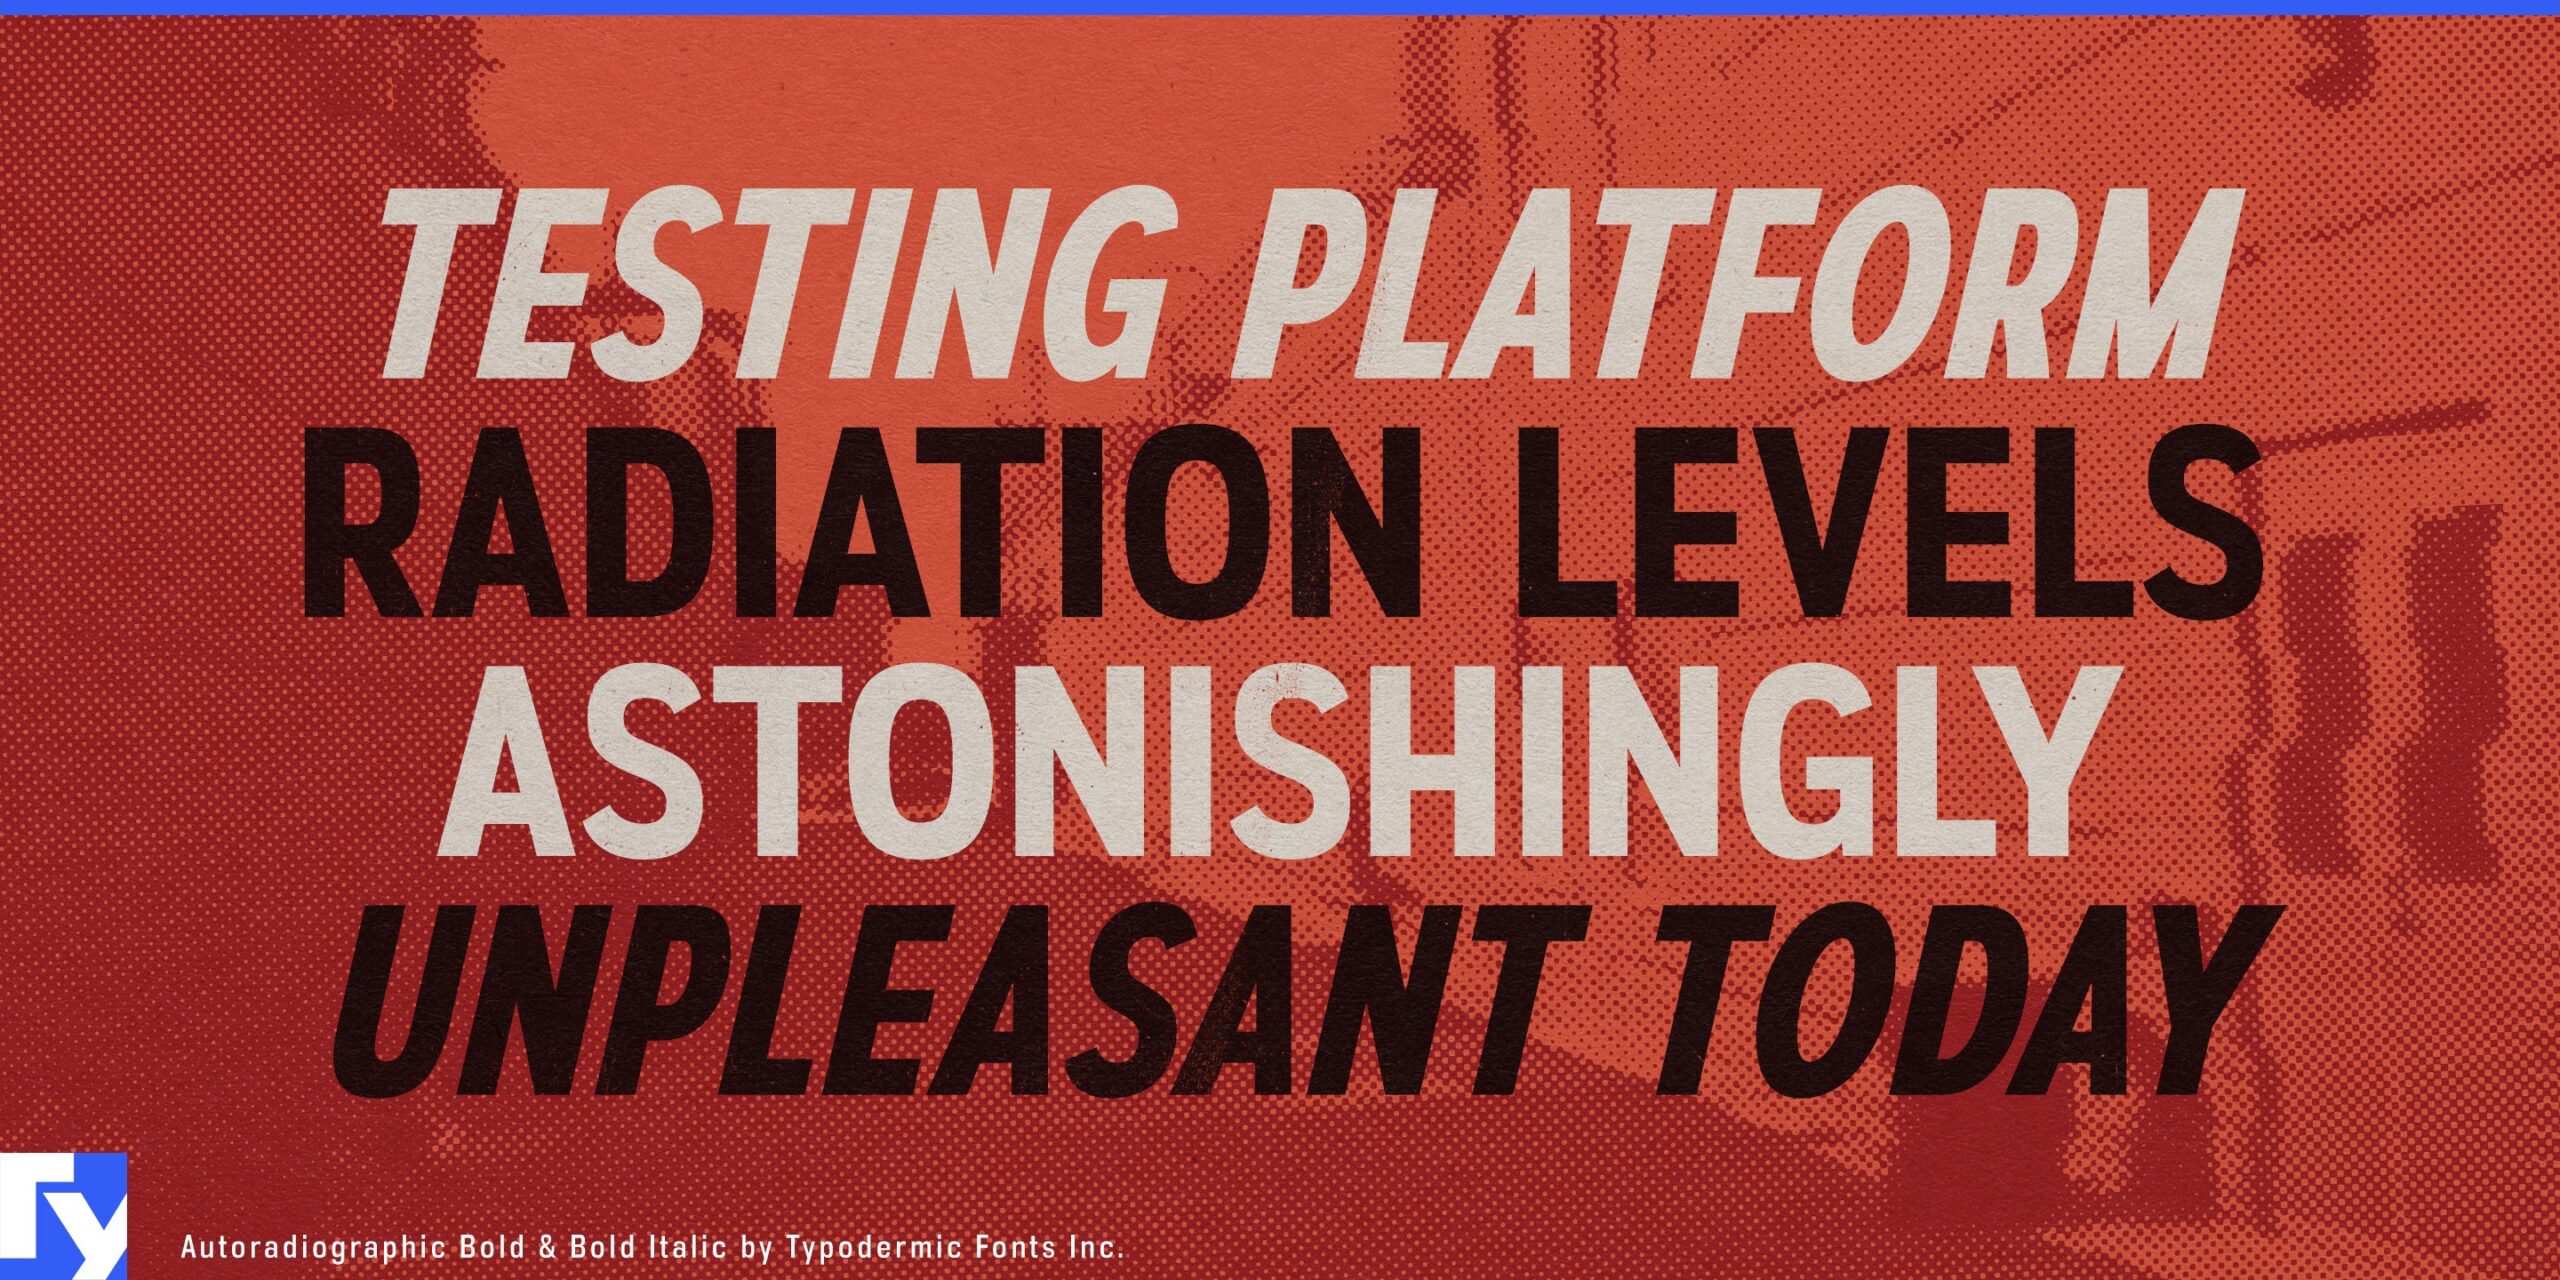 Get Inspired by Trusty Old Warning Signs with Autoradiographic Typeface